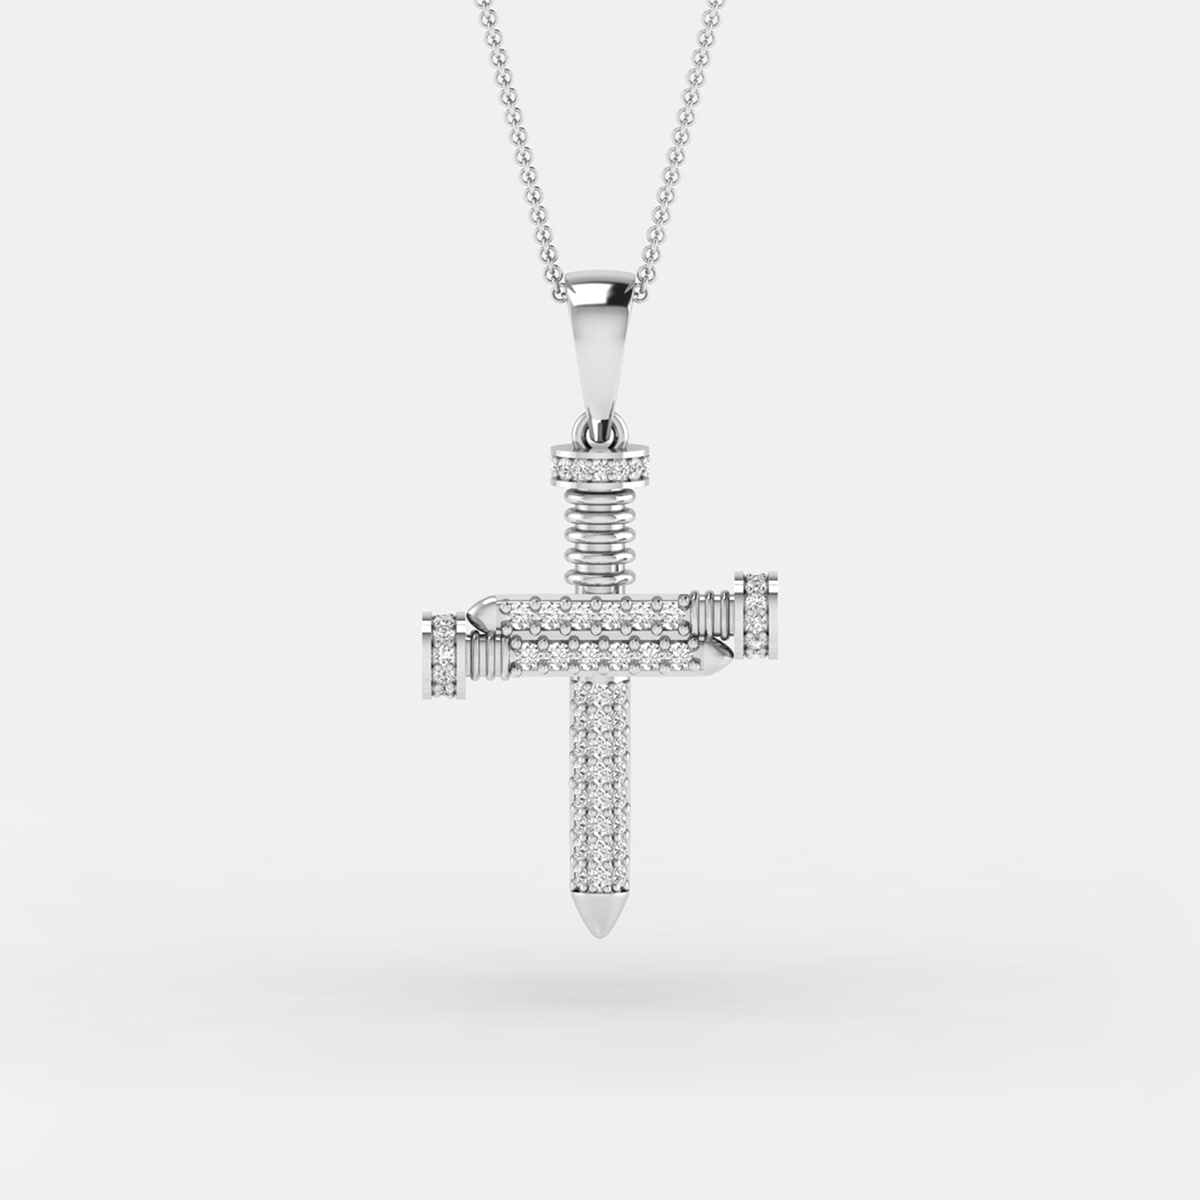 Deluxe Sterling Silver Cross Necklace | Hersey & Son Silversmiths